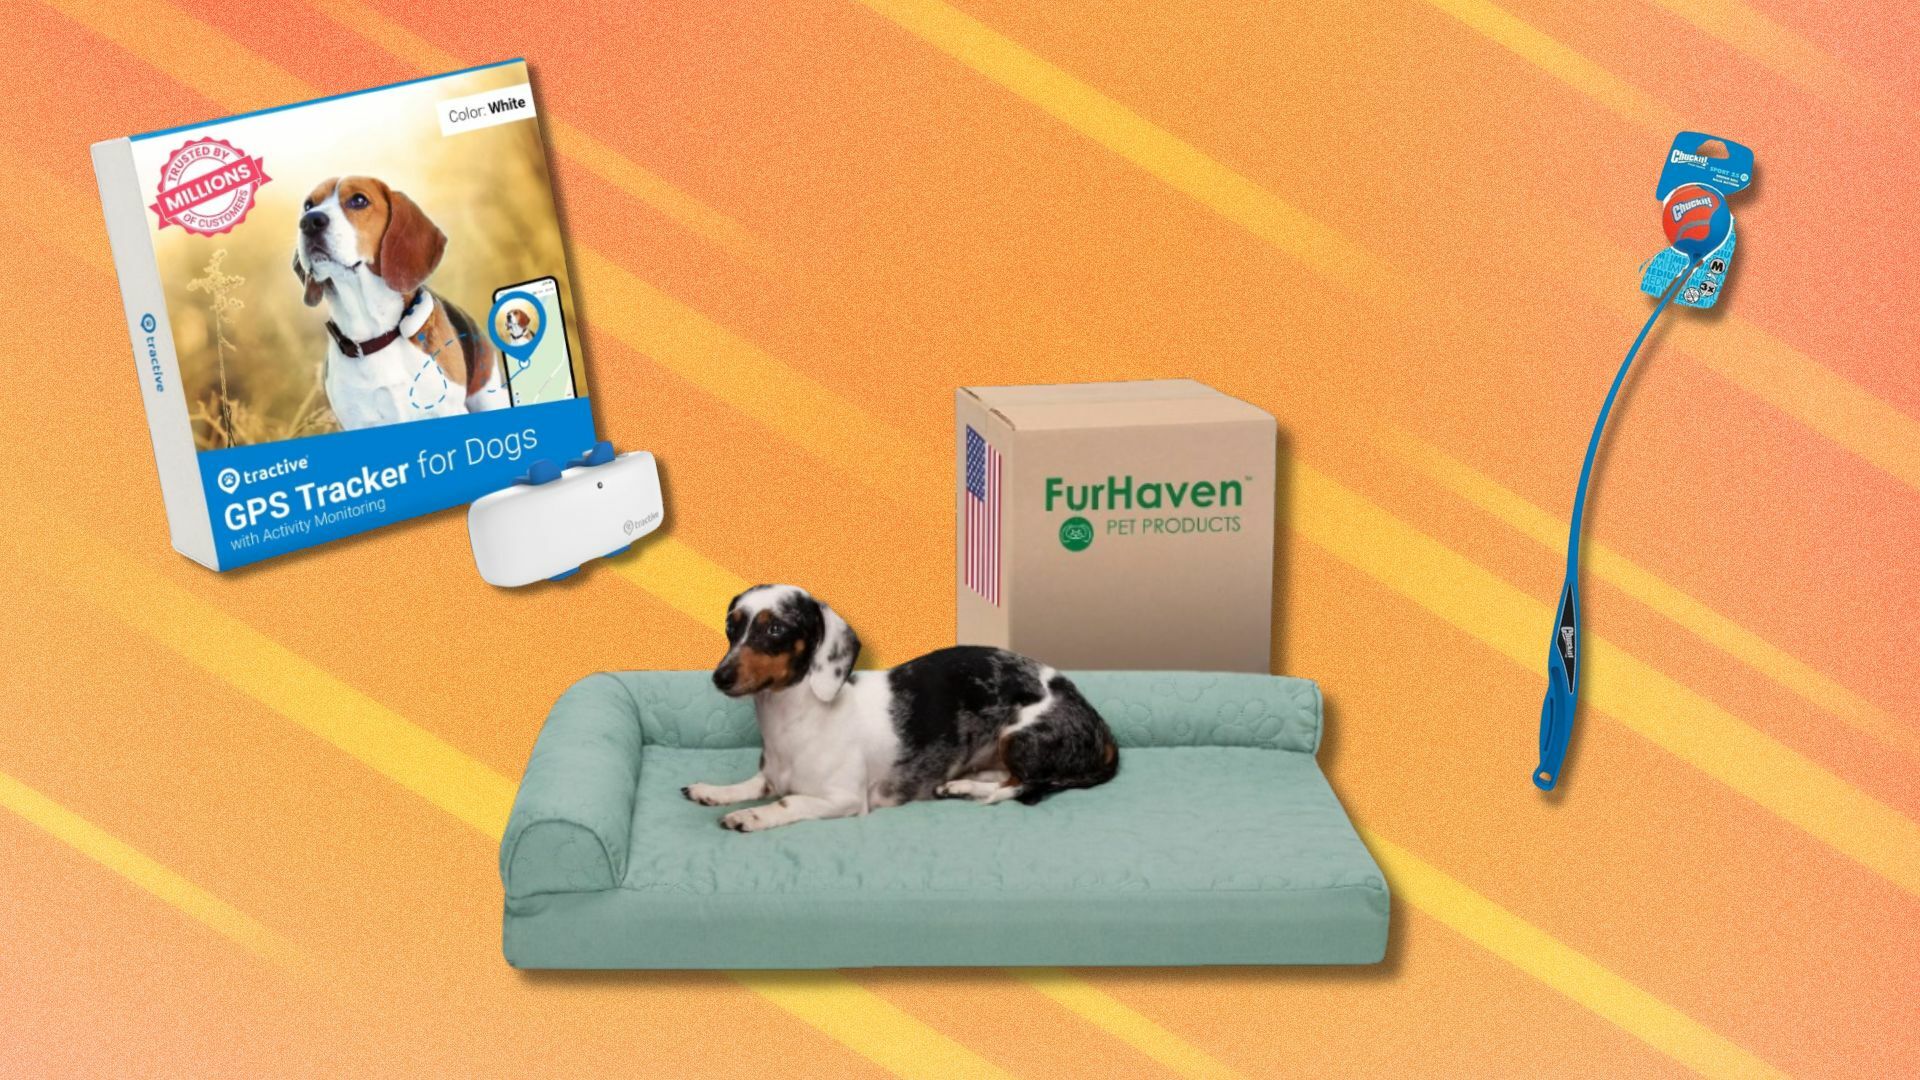 a tractive GPS tracker for dogs, a furhaven dog bed with its box and dog sleeping on the bed, and a chuckit ball launcher on an orange background